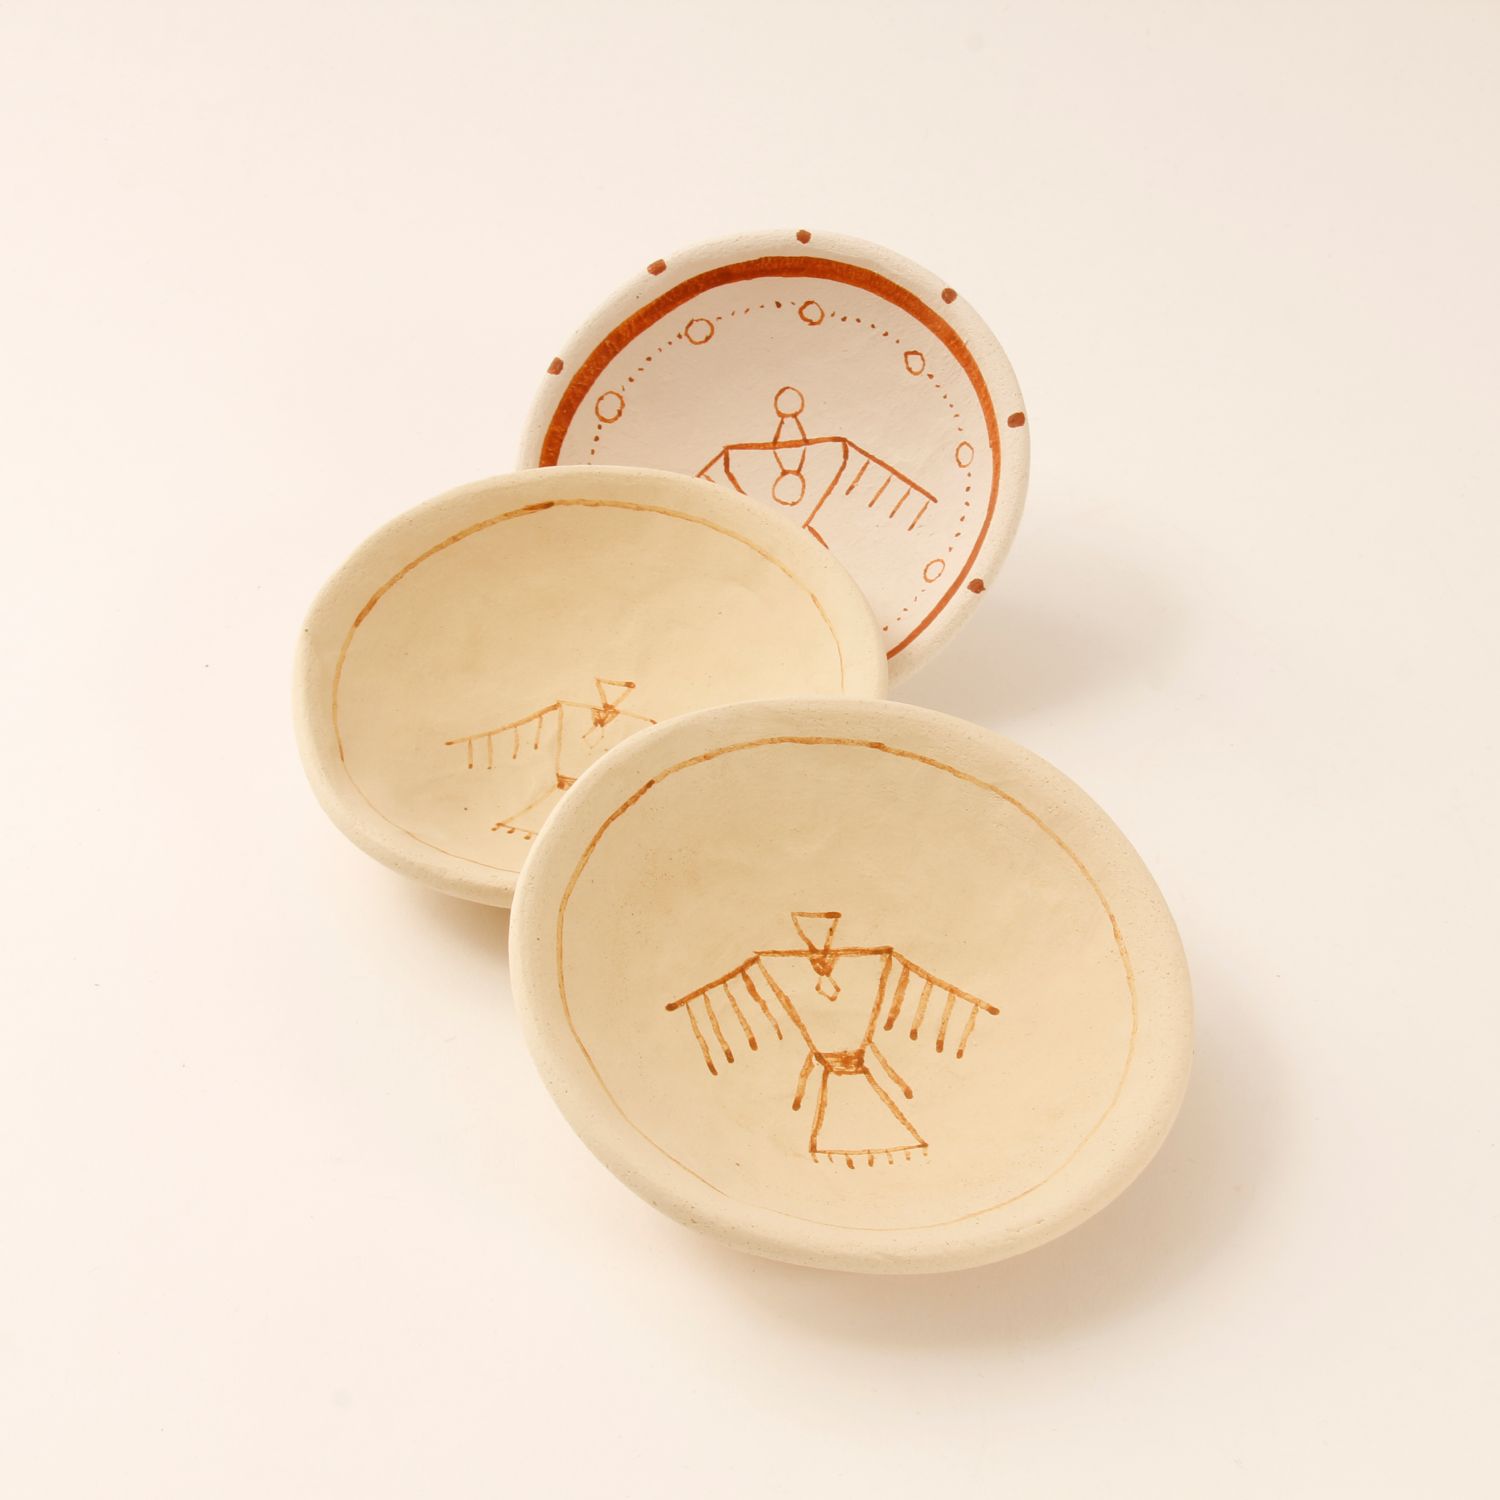 David Migwans: Assorted Heron Bowl (Each sold separately) Product Image 1 of 2